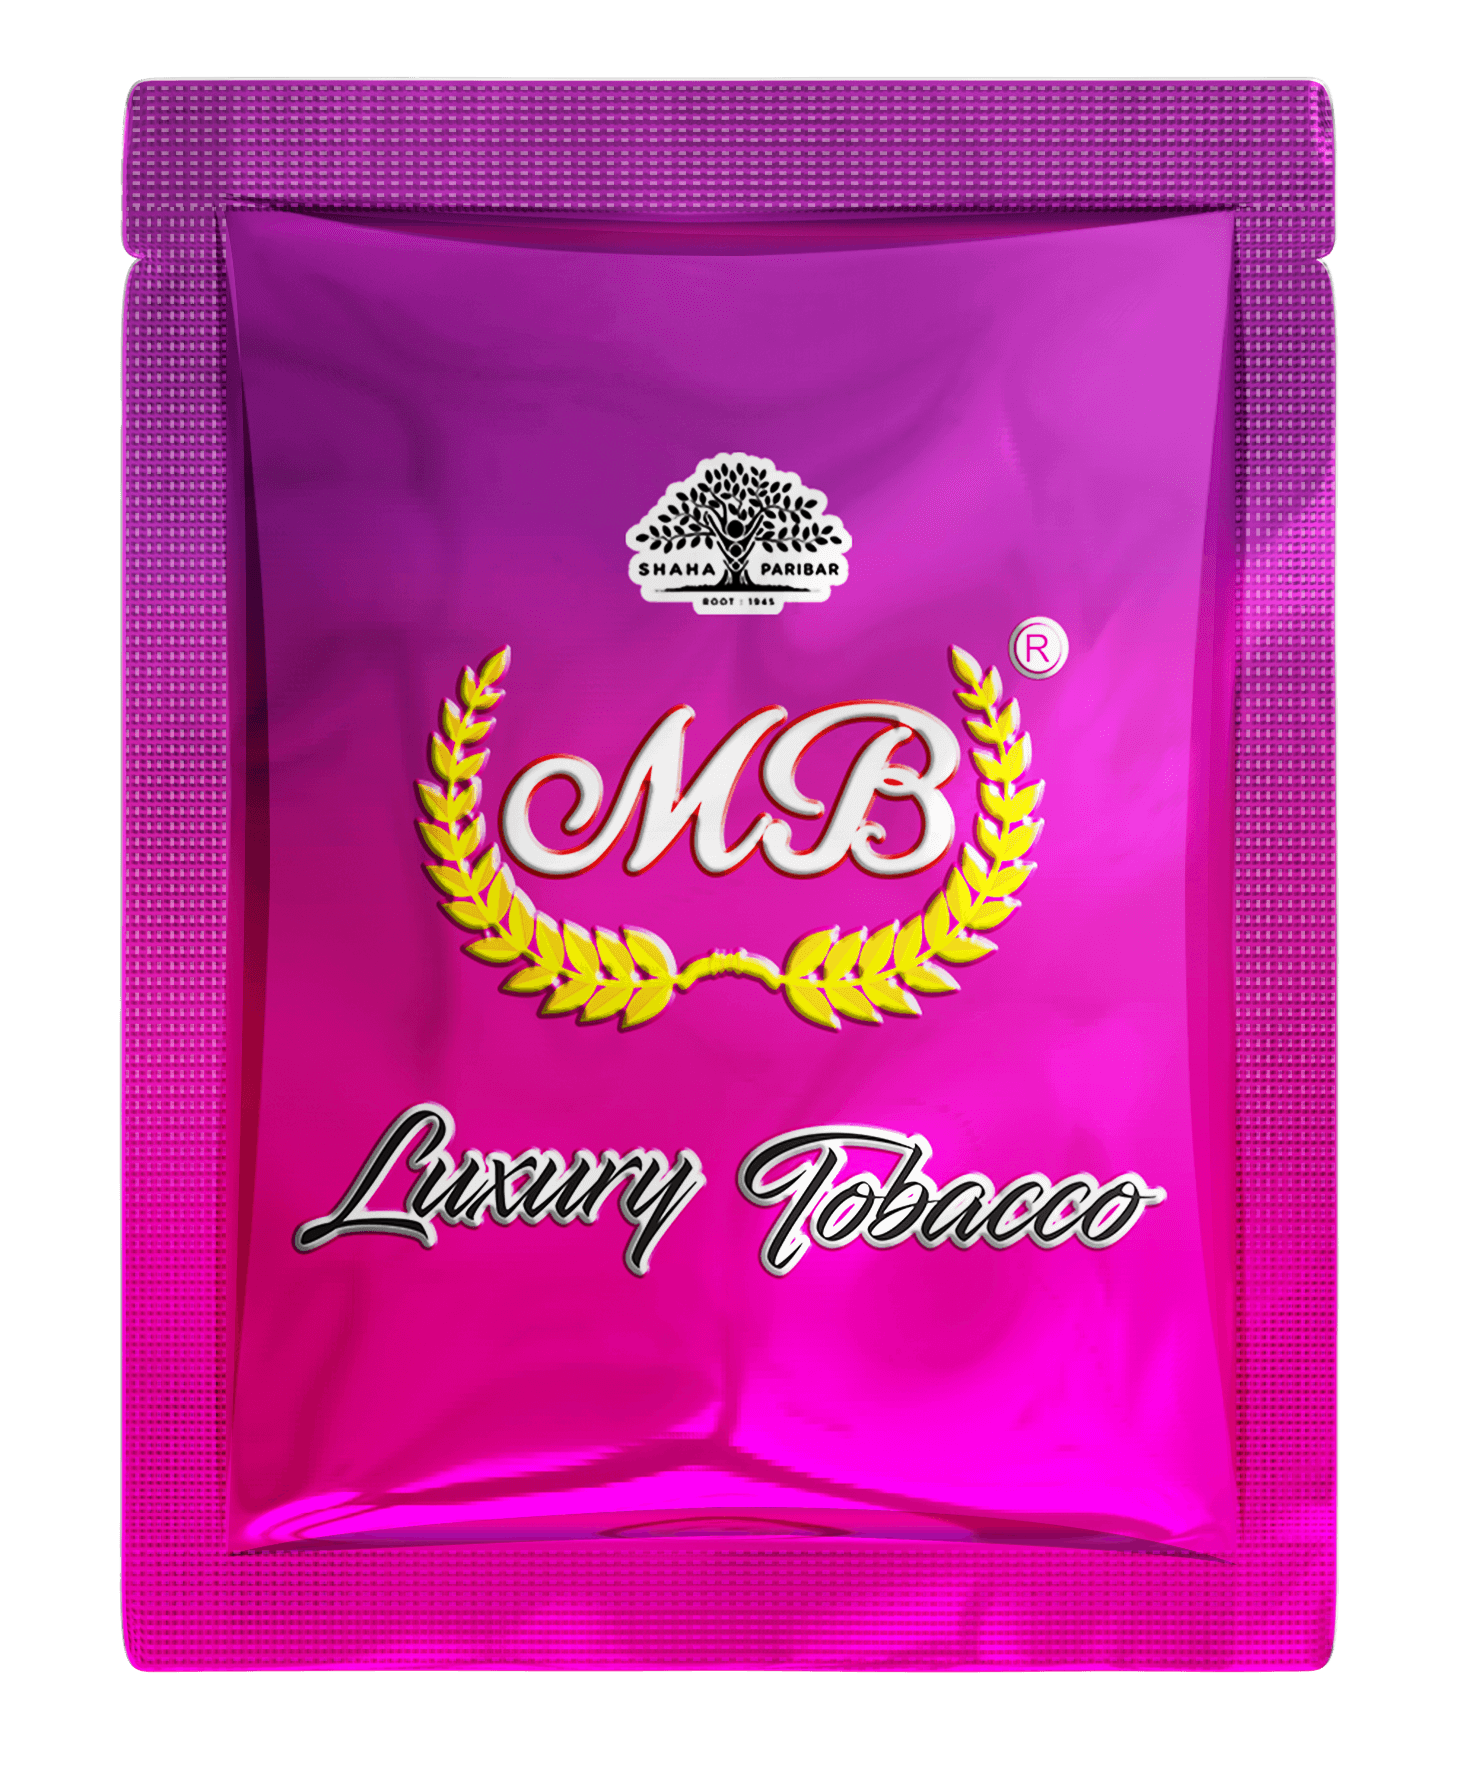 MB Luxury Chewing Tobacco - best Indian flavoured chewing tobacco